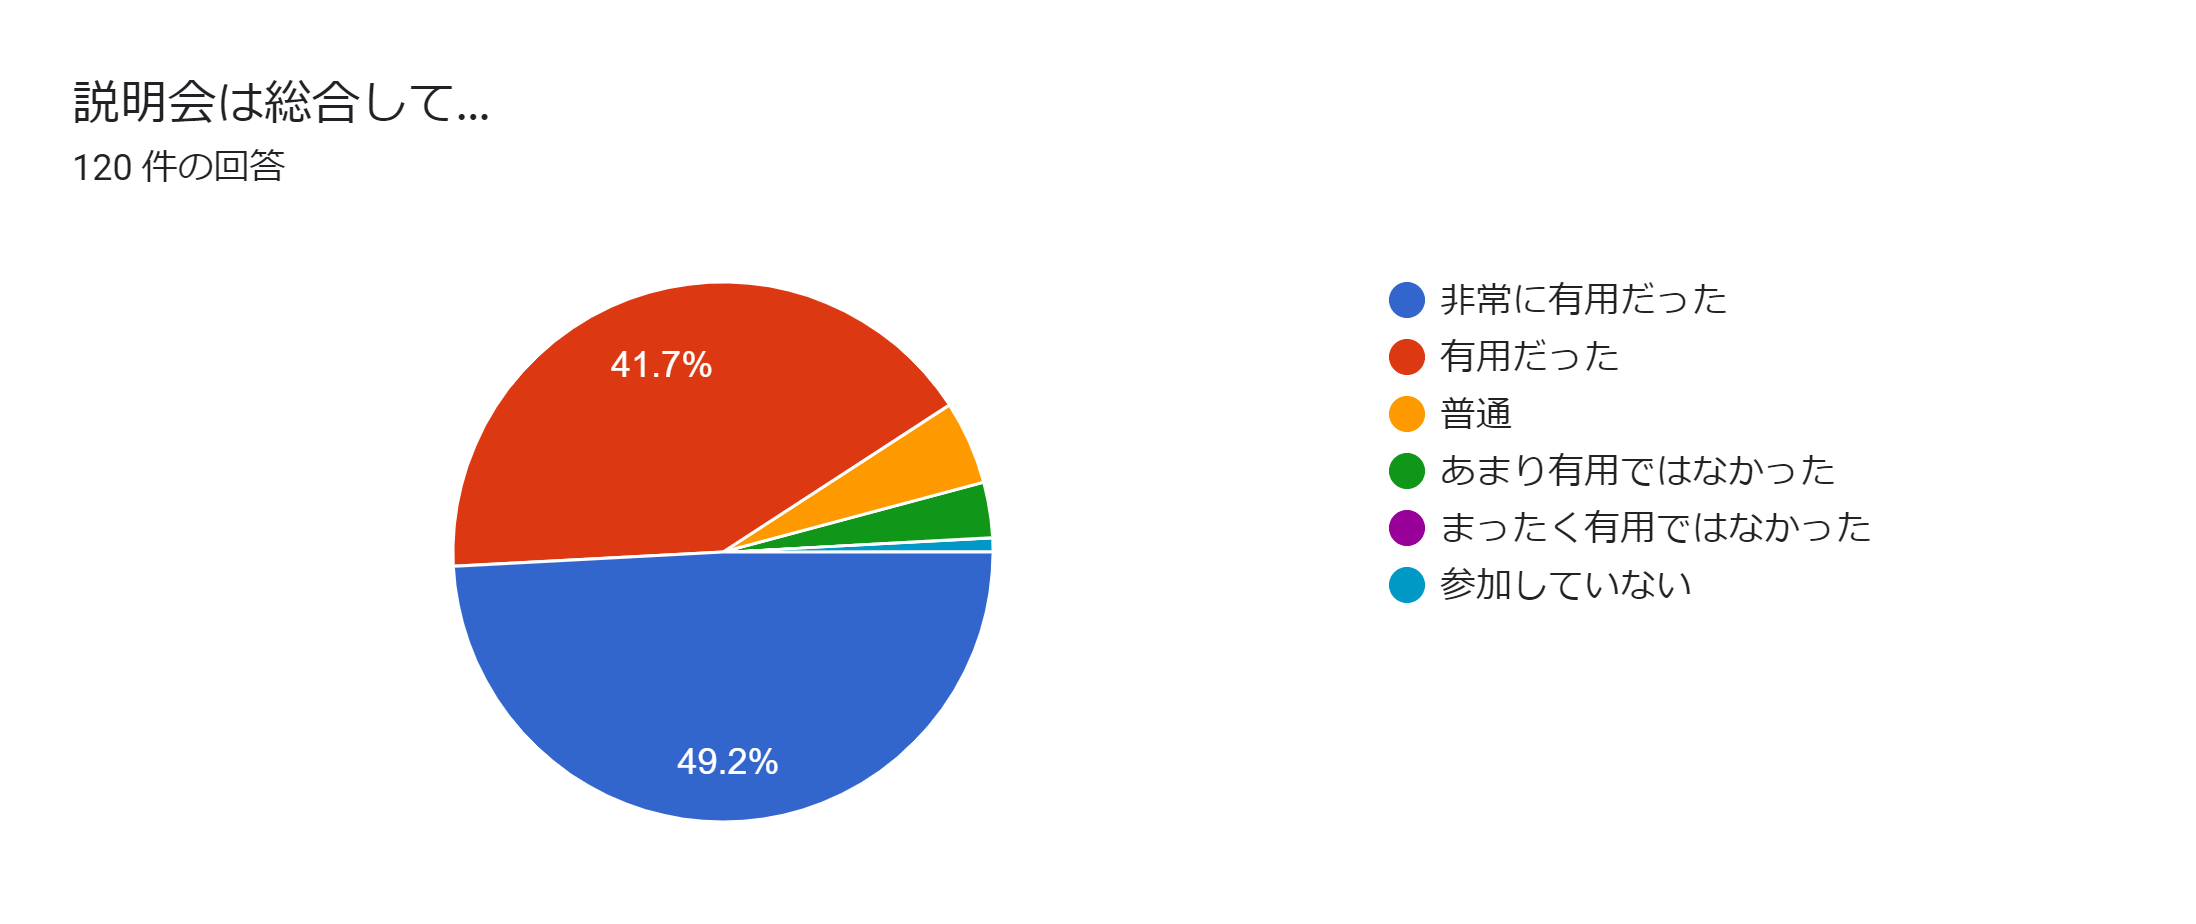 Results of questionnaire: overall evaluation